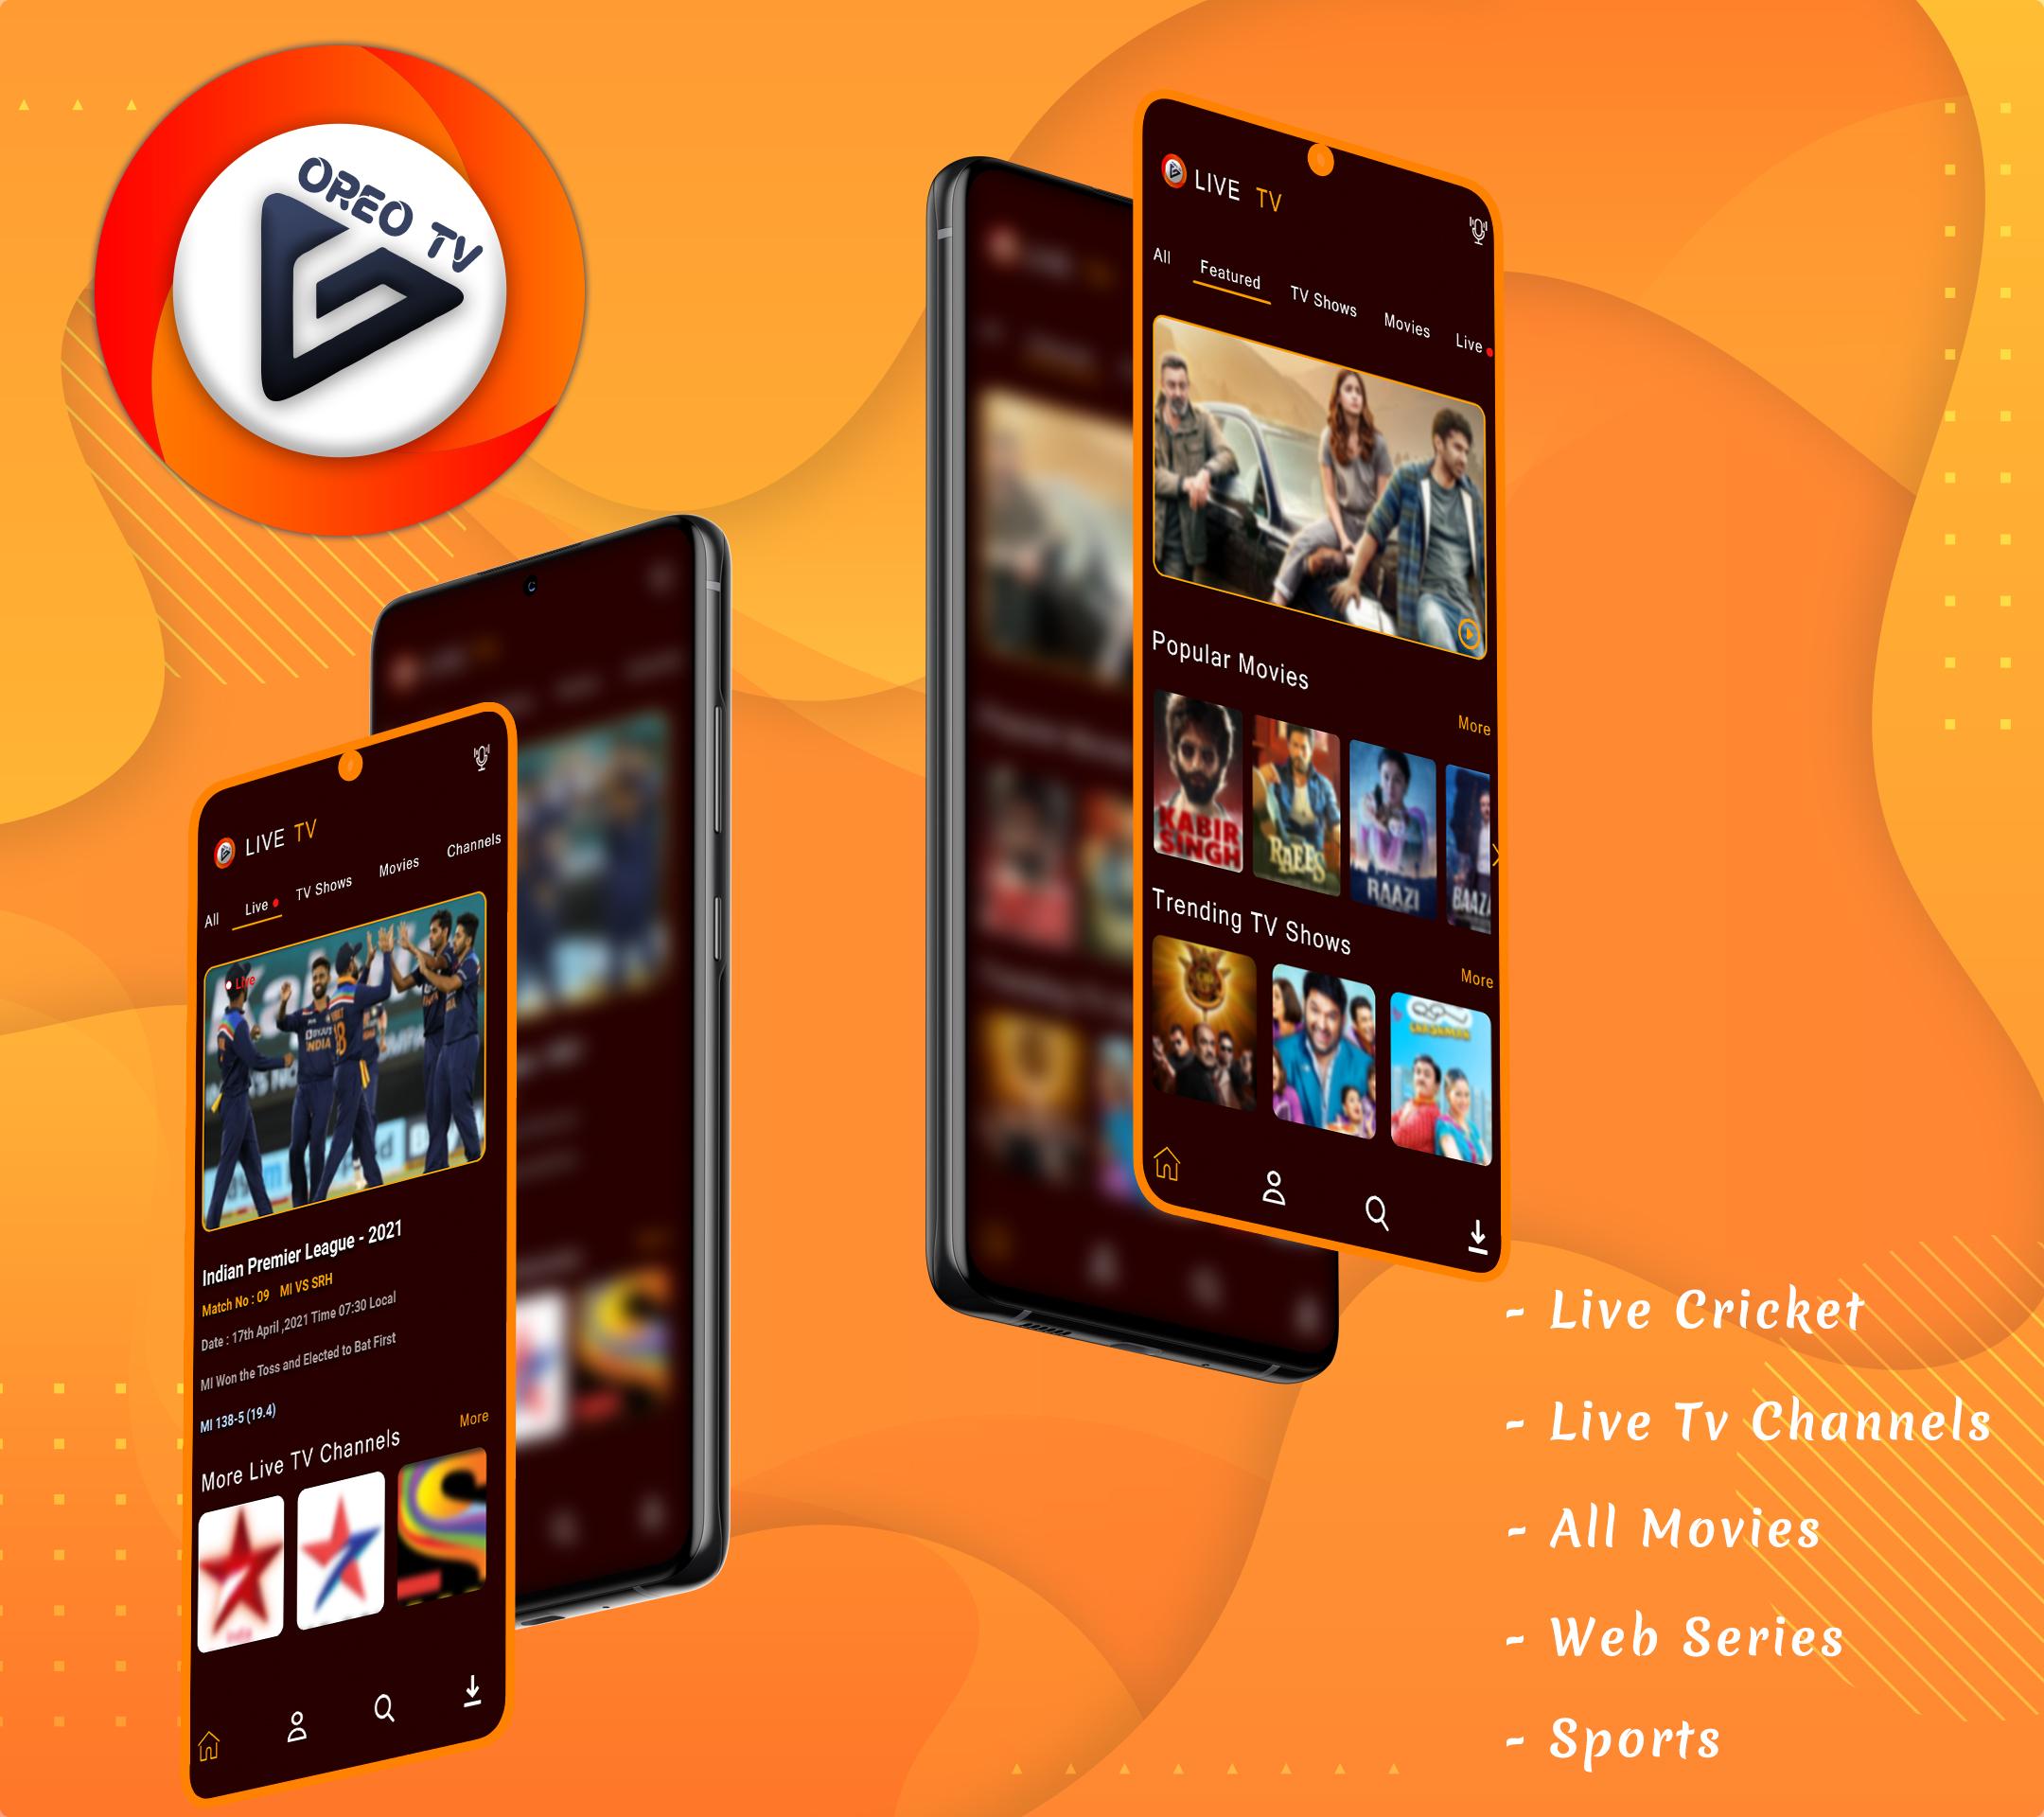 LIVE Cricket TV - Oreo Tv Guide for Android - APK Download